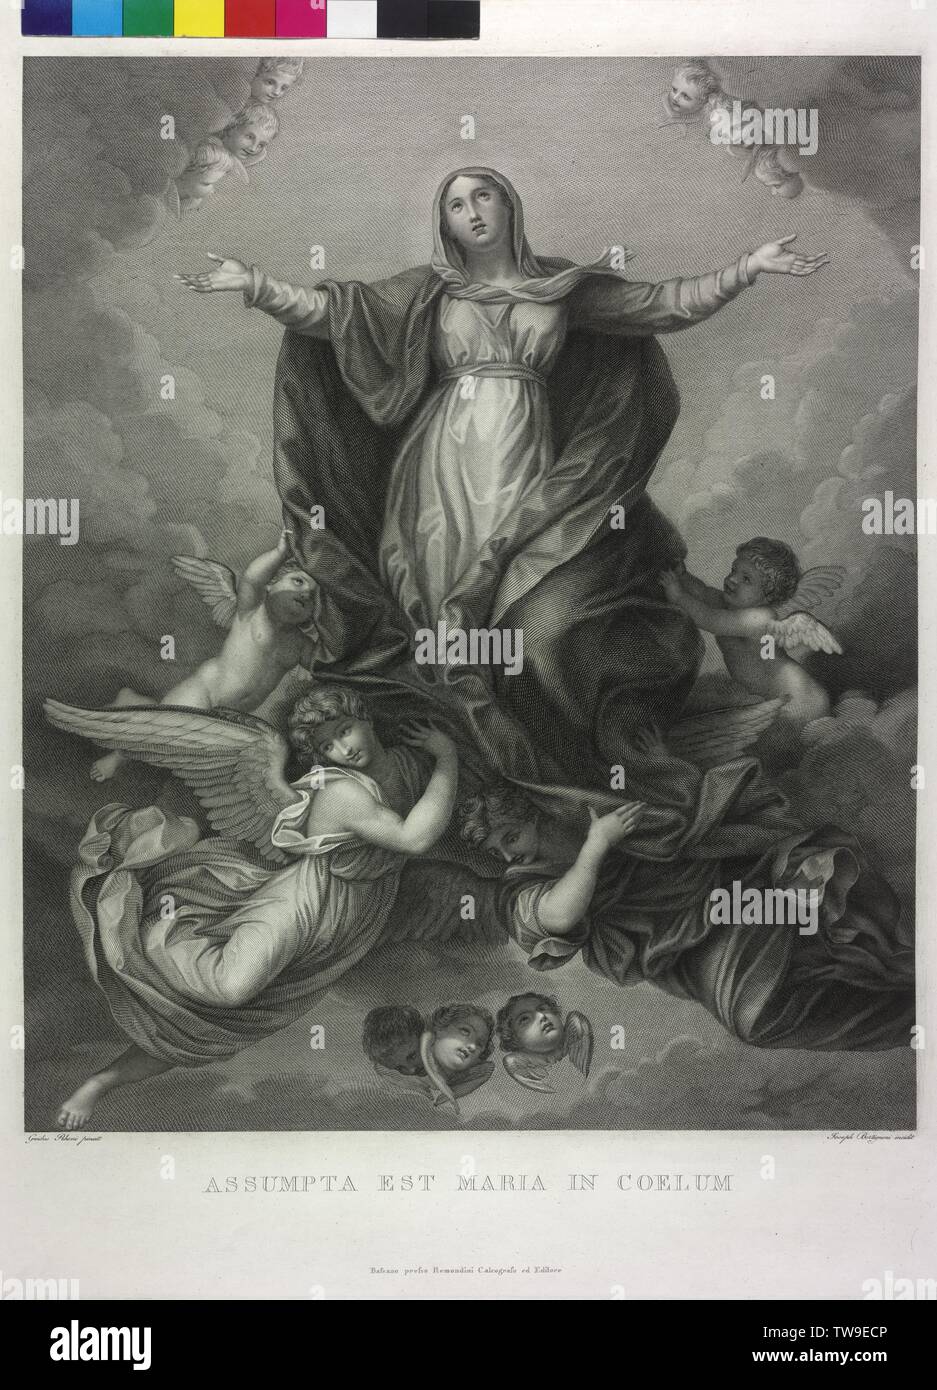 Assumption of the Blessed Virgin Mary, copper engraving by Giuseppe Bortignoni based on painting by Guido Reni from 1642 (old pinacotheca Munich), Additional-Rights-Clearance-Info-Not-Available Stock Photo